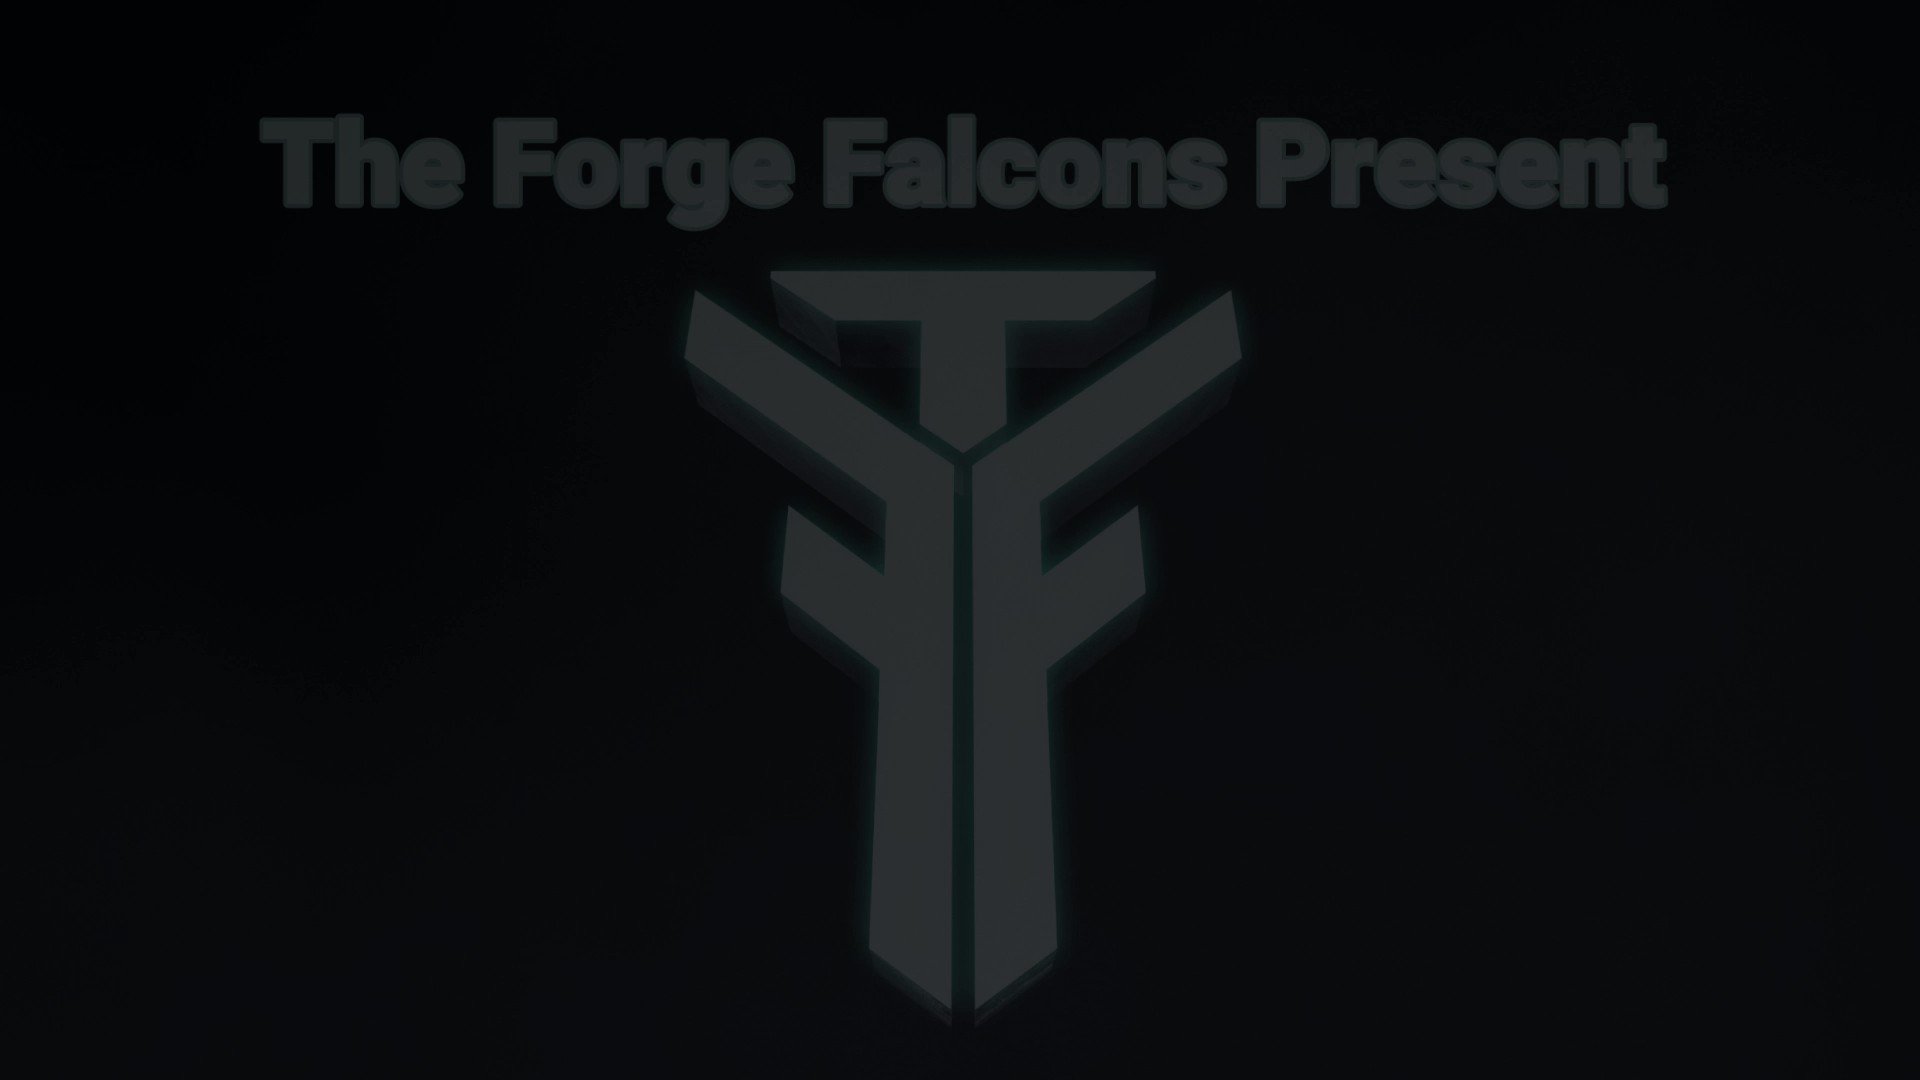 The Forge Falcons on X: Inheritor: Battle Royale in forge drops tomorrow! :  r/halo